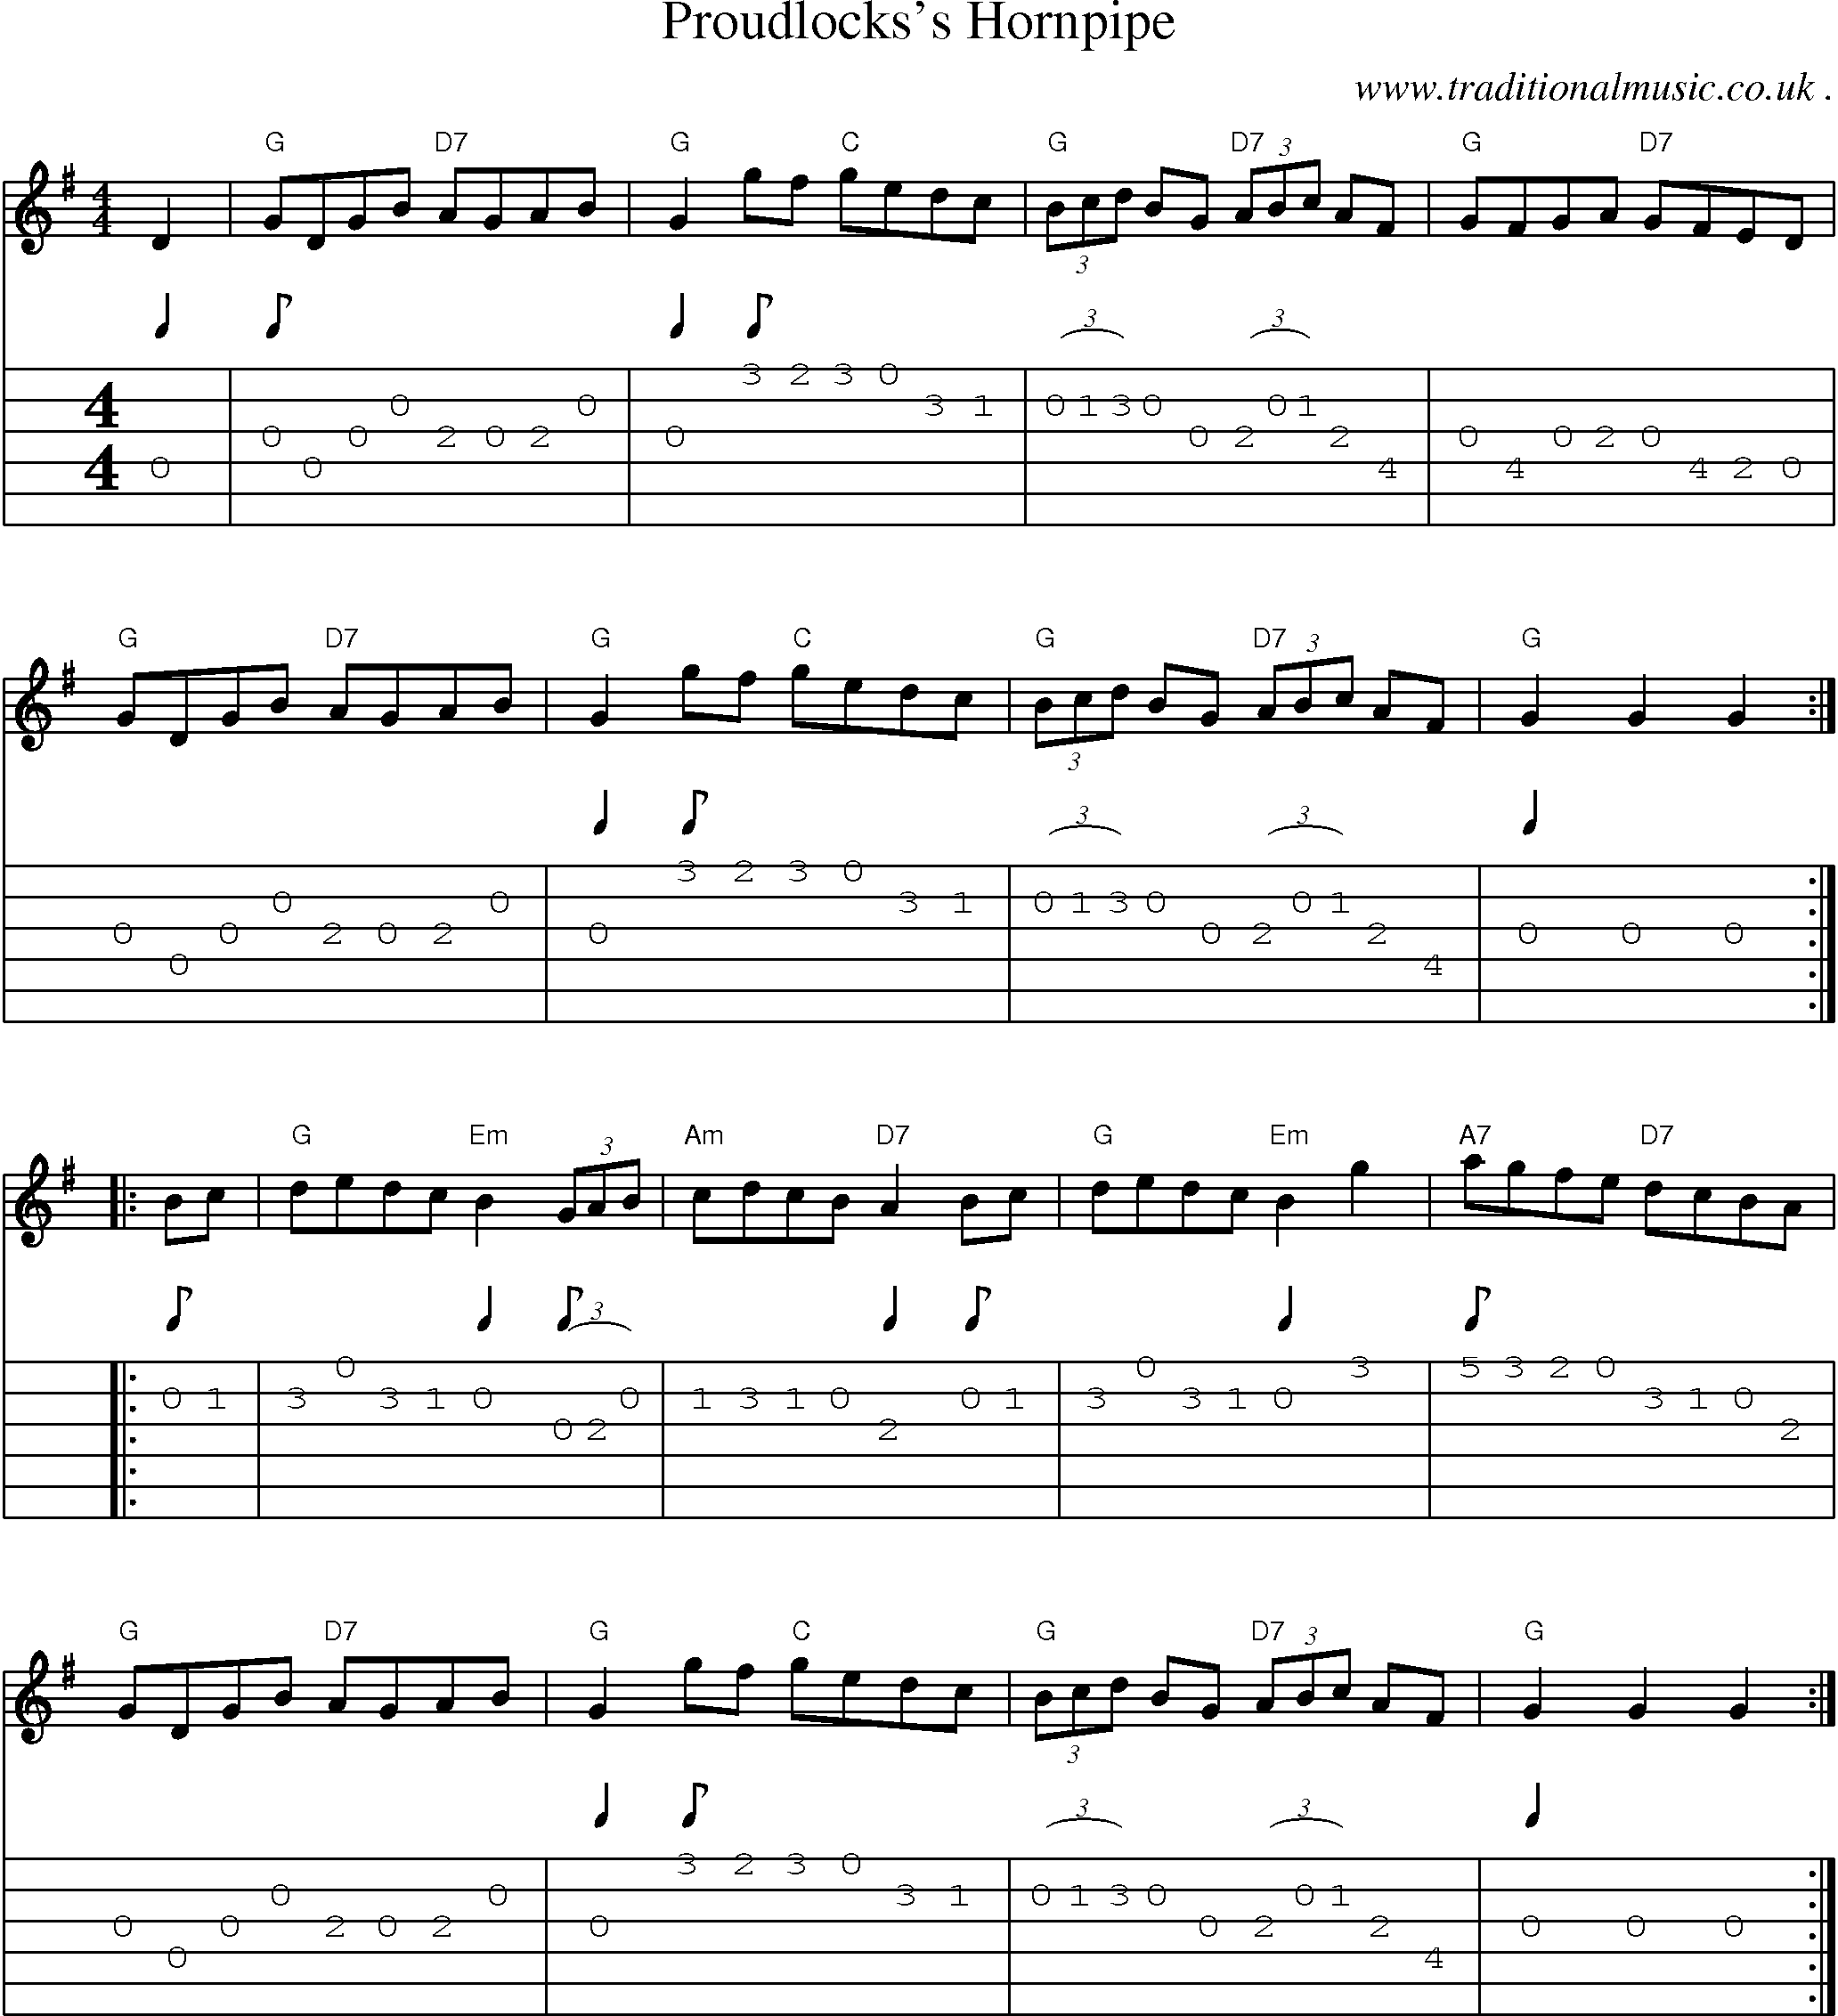 Music Score and Guitar Tabs for Proudlockss Hornpipe